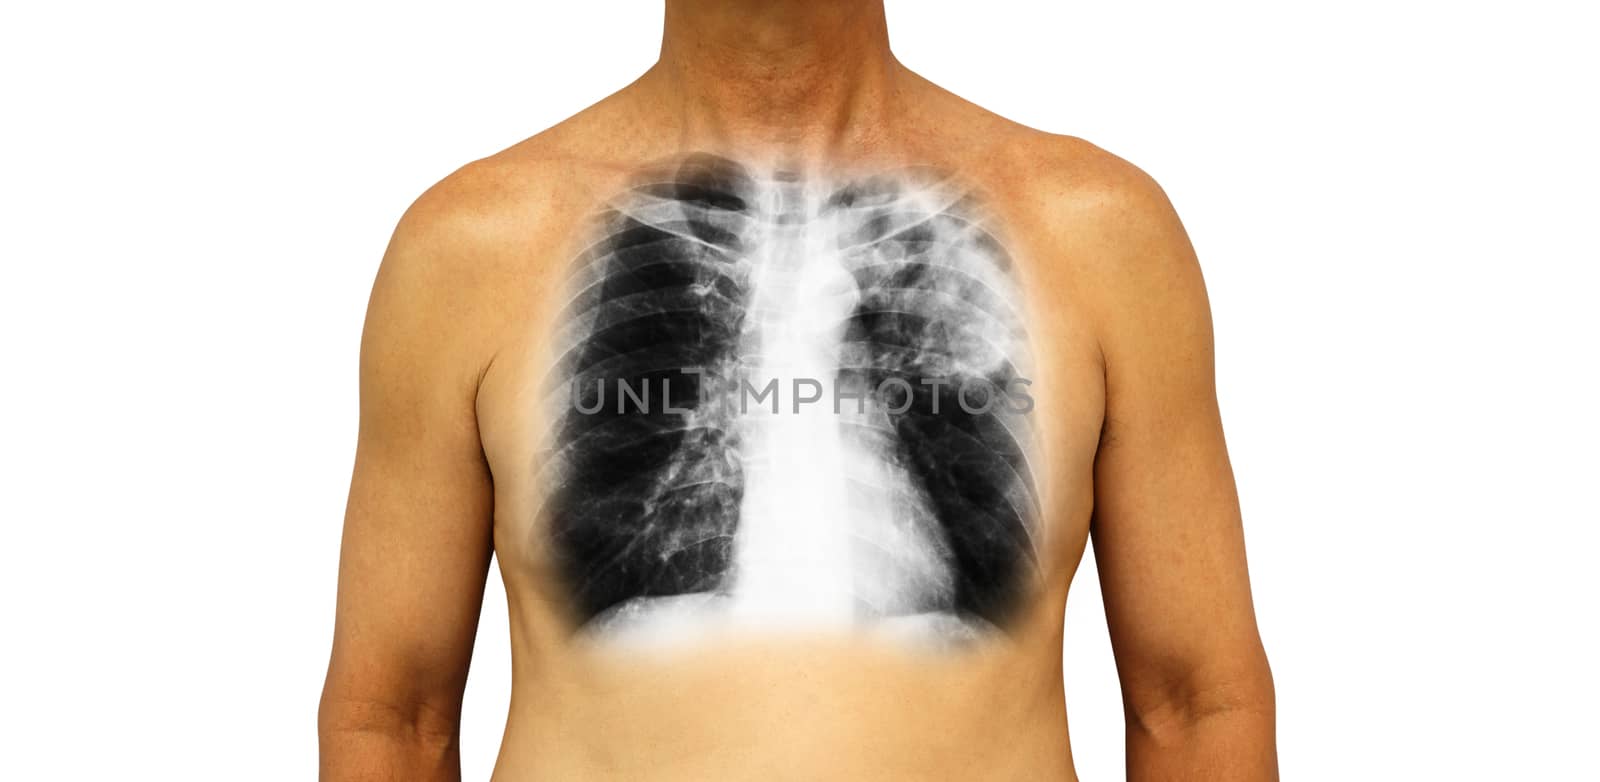 Pulmonary tuberculosis . Human chest with x-ray show patchy infiltrate left upper lung due to infection . Isolated background .